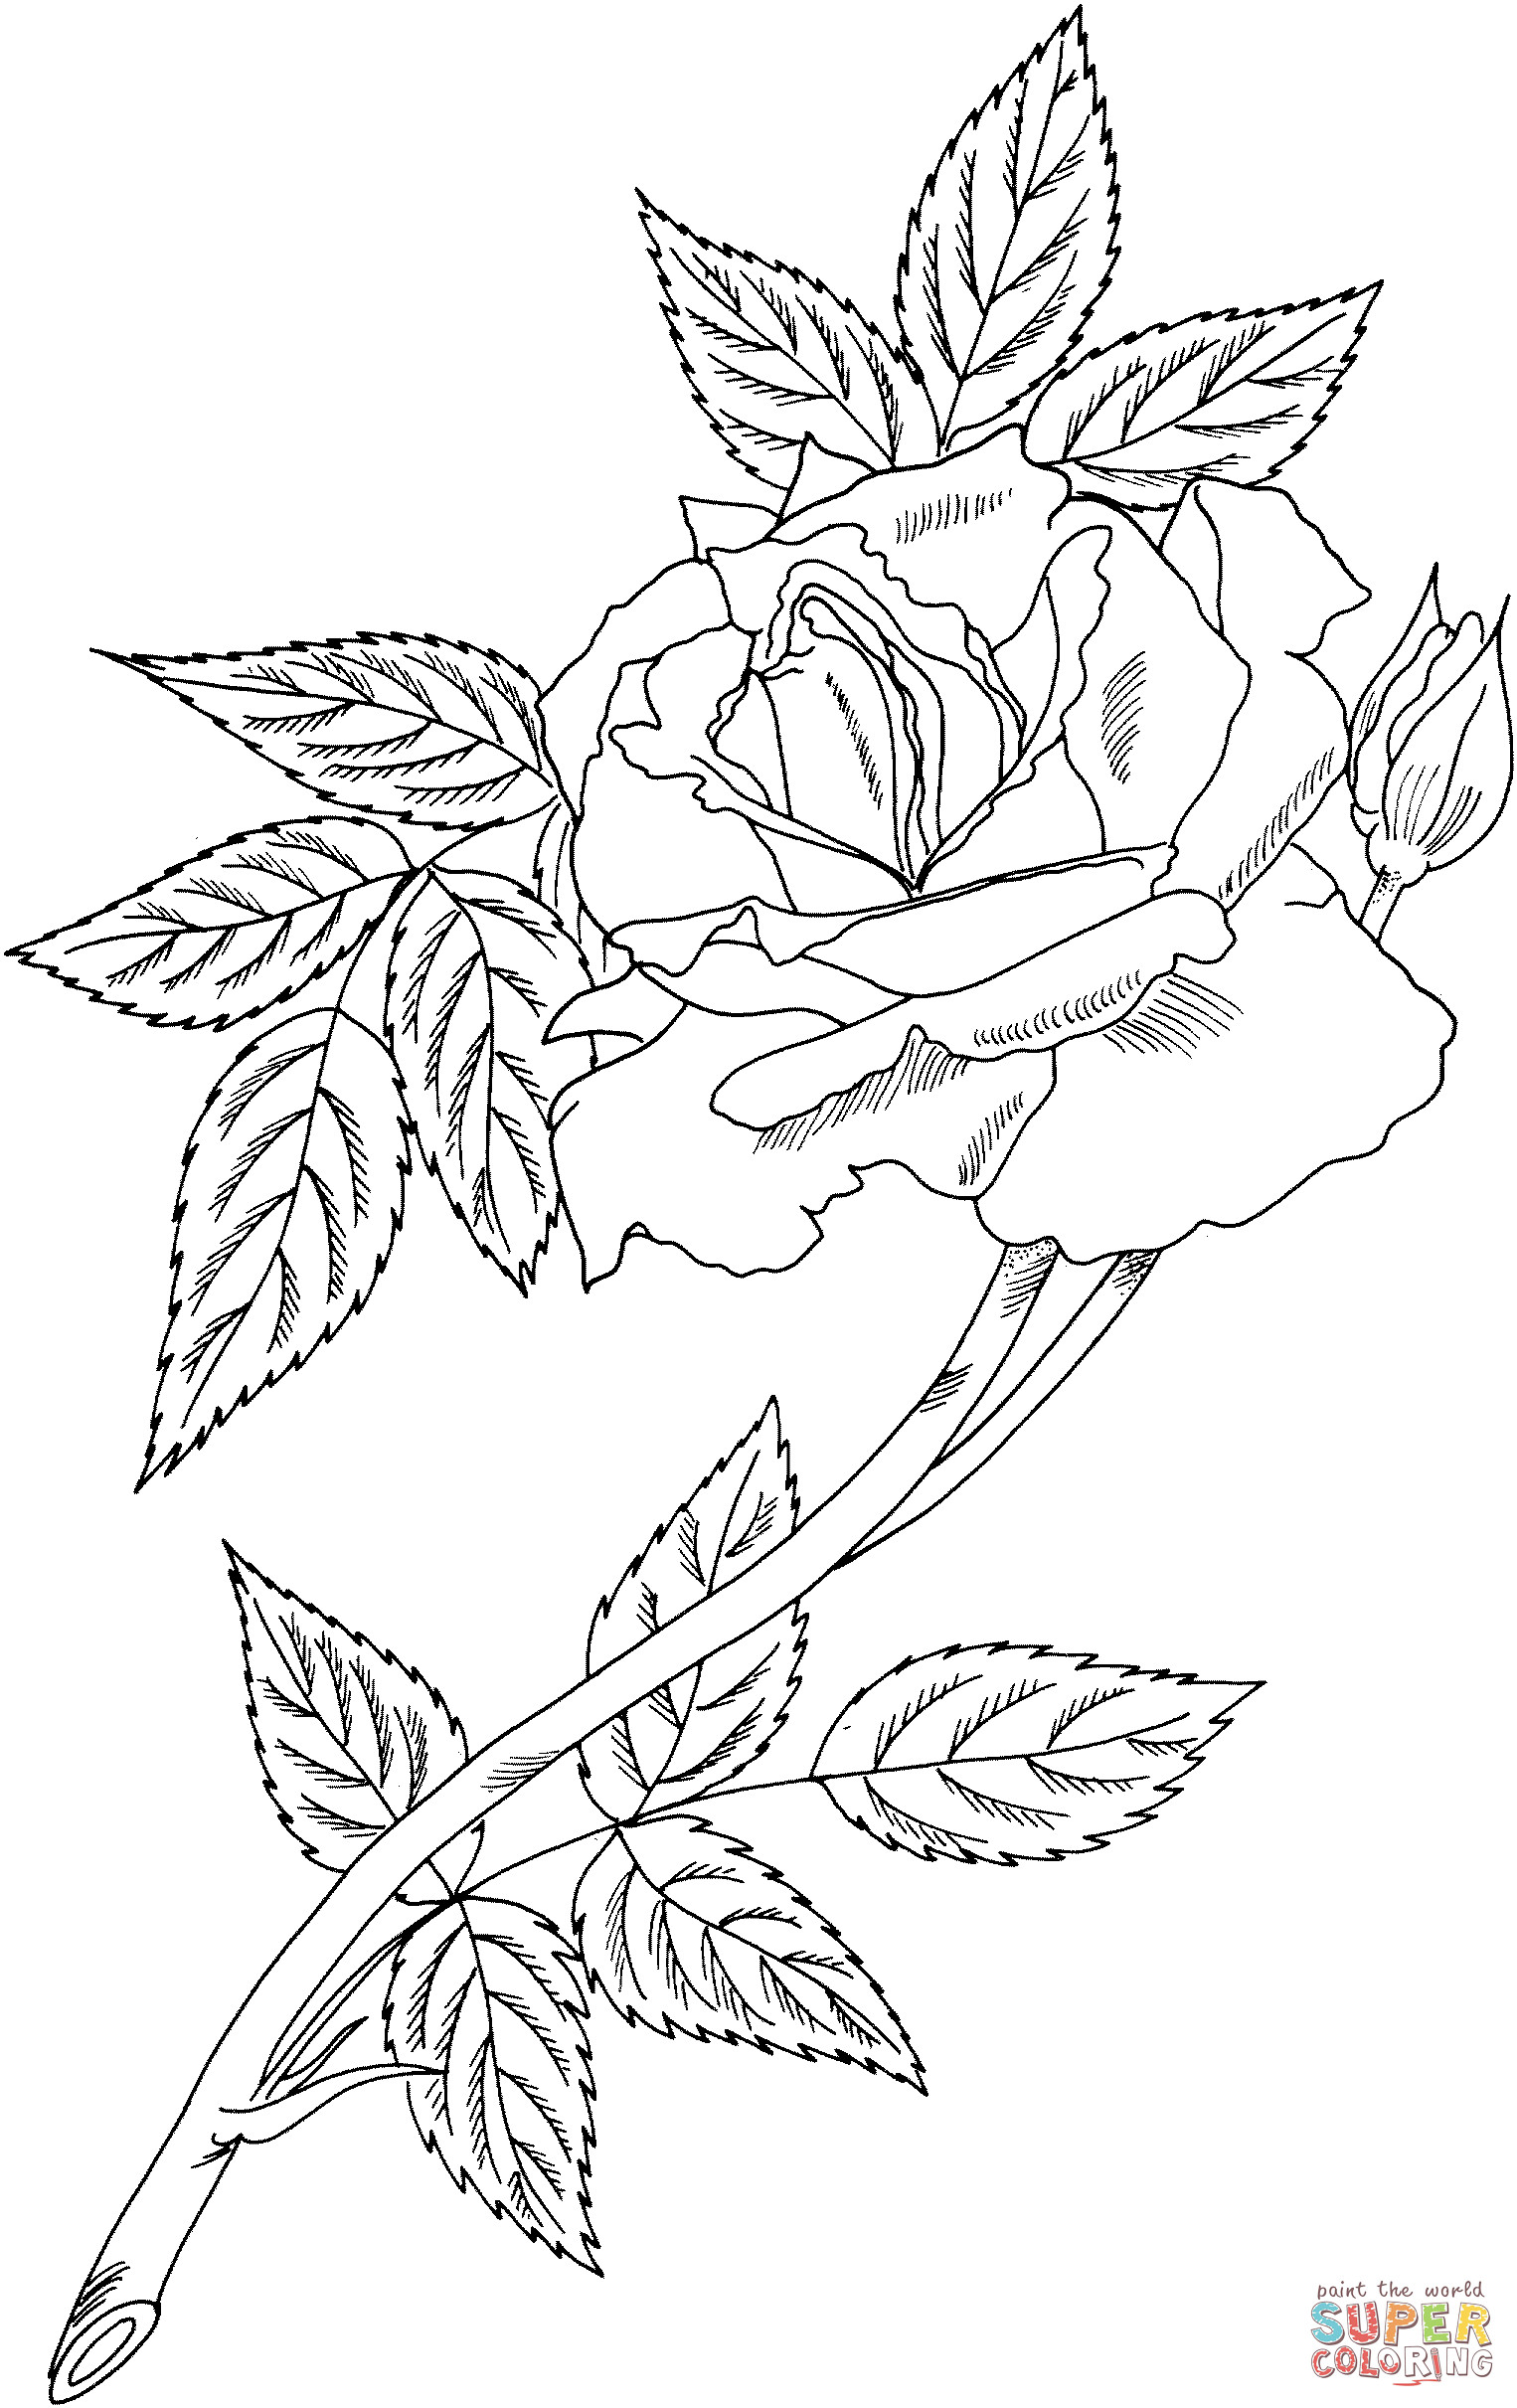 Sunset Coloring Pages For Adults
 Sunset Coloring Pages For Adults Coloring Pages